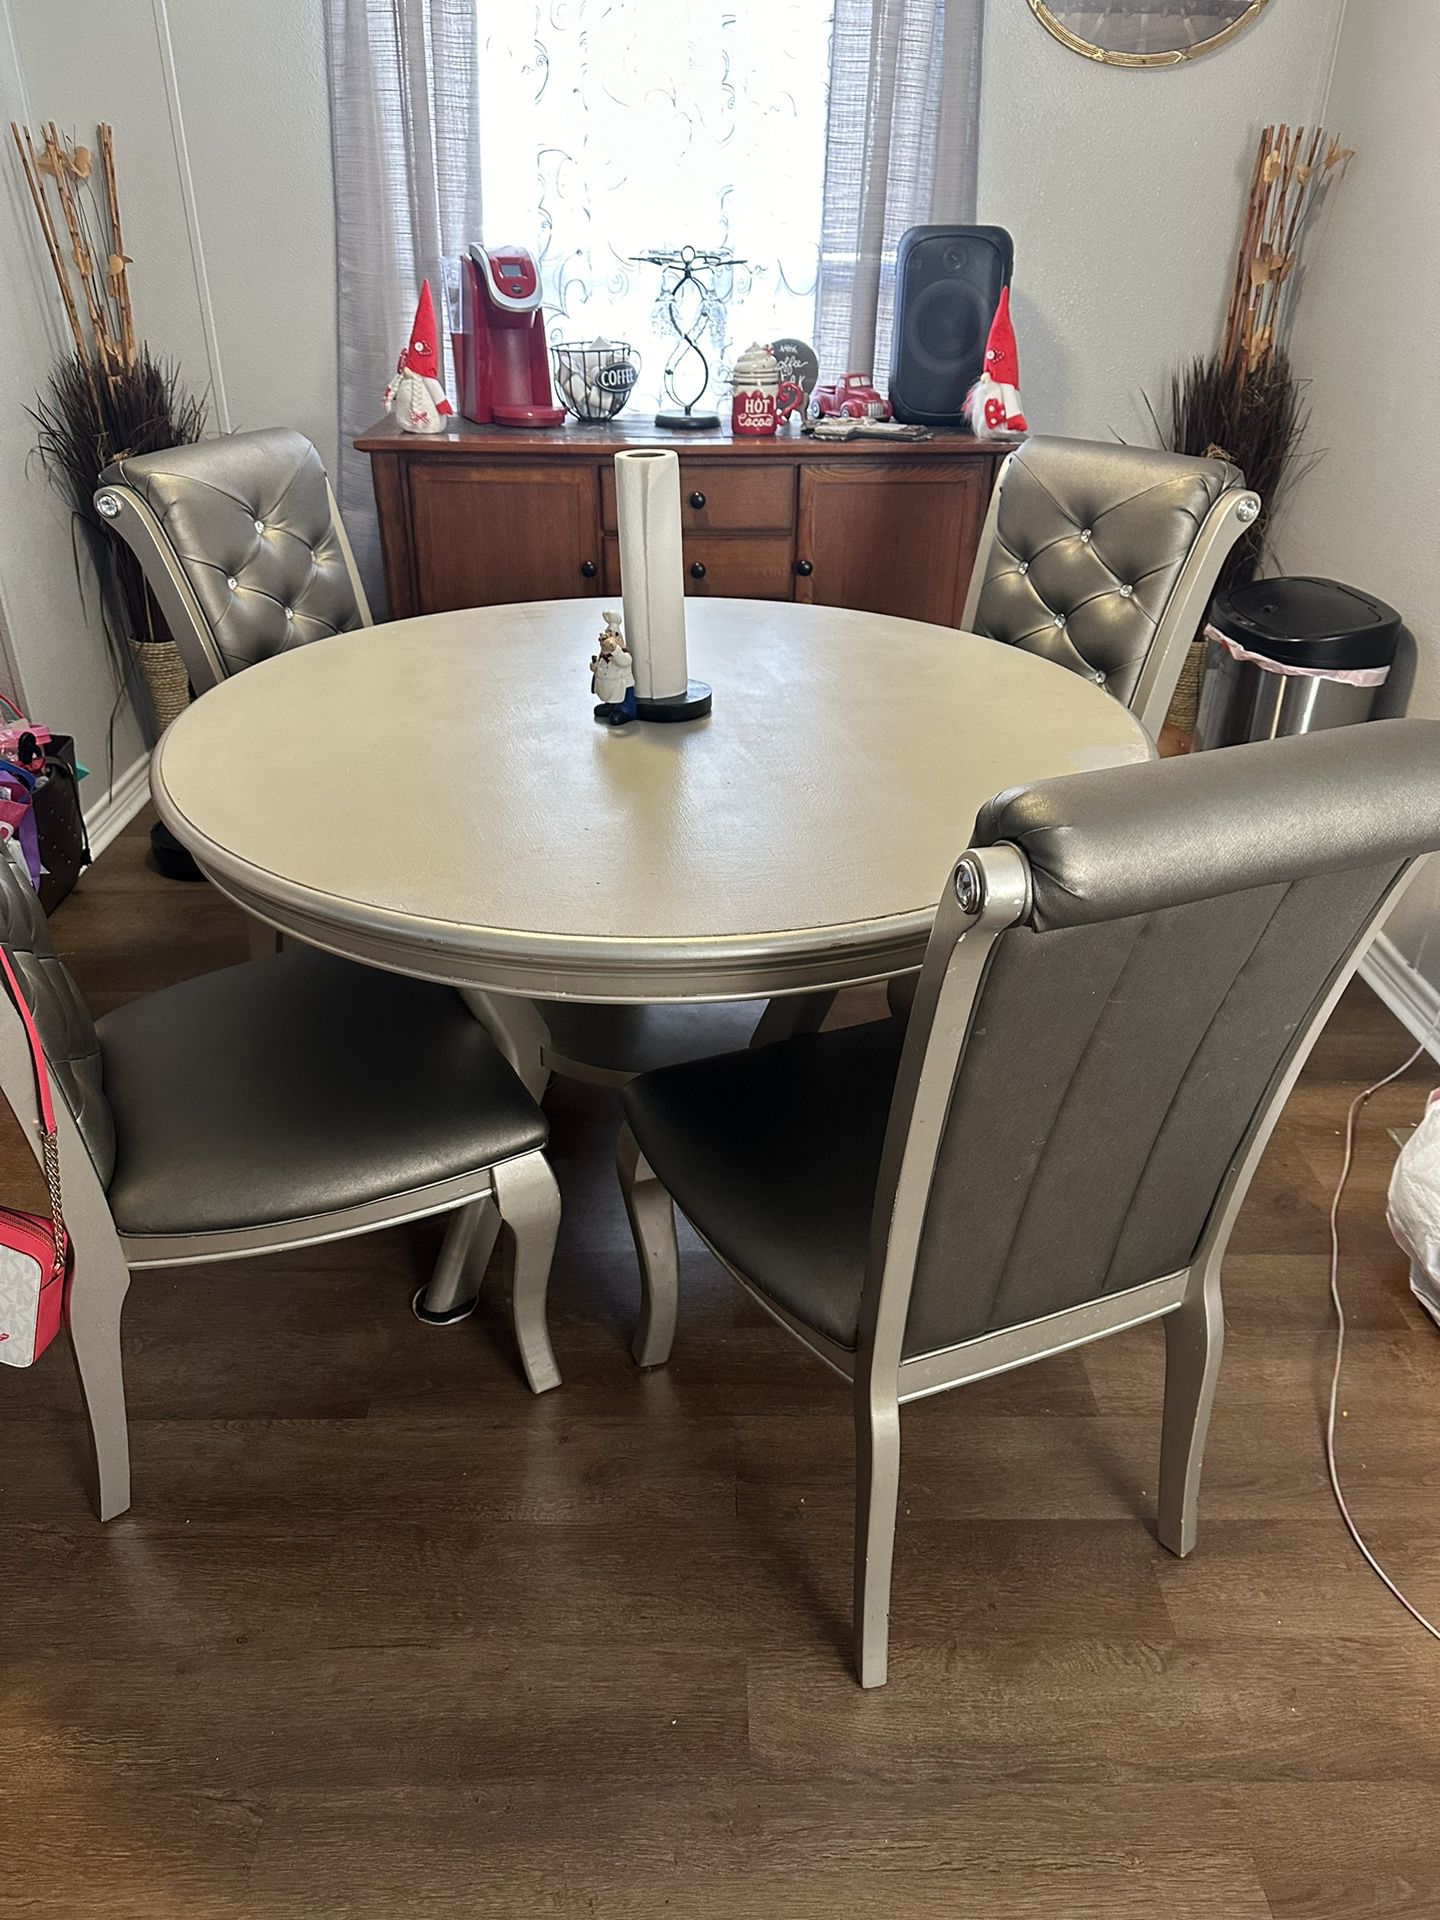 kitchen/dining table great sturdy condition has its flaws as pictured 